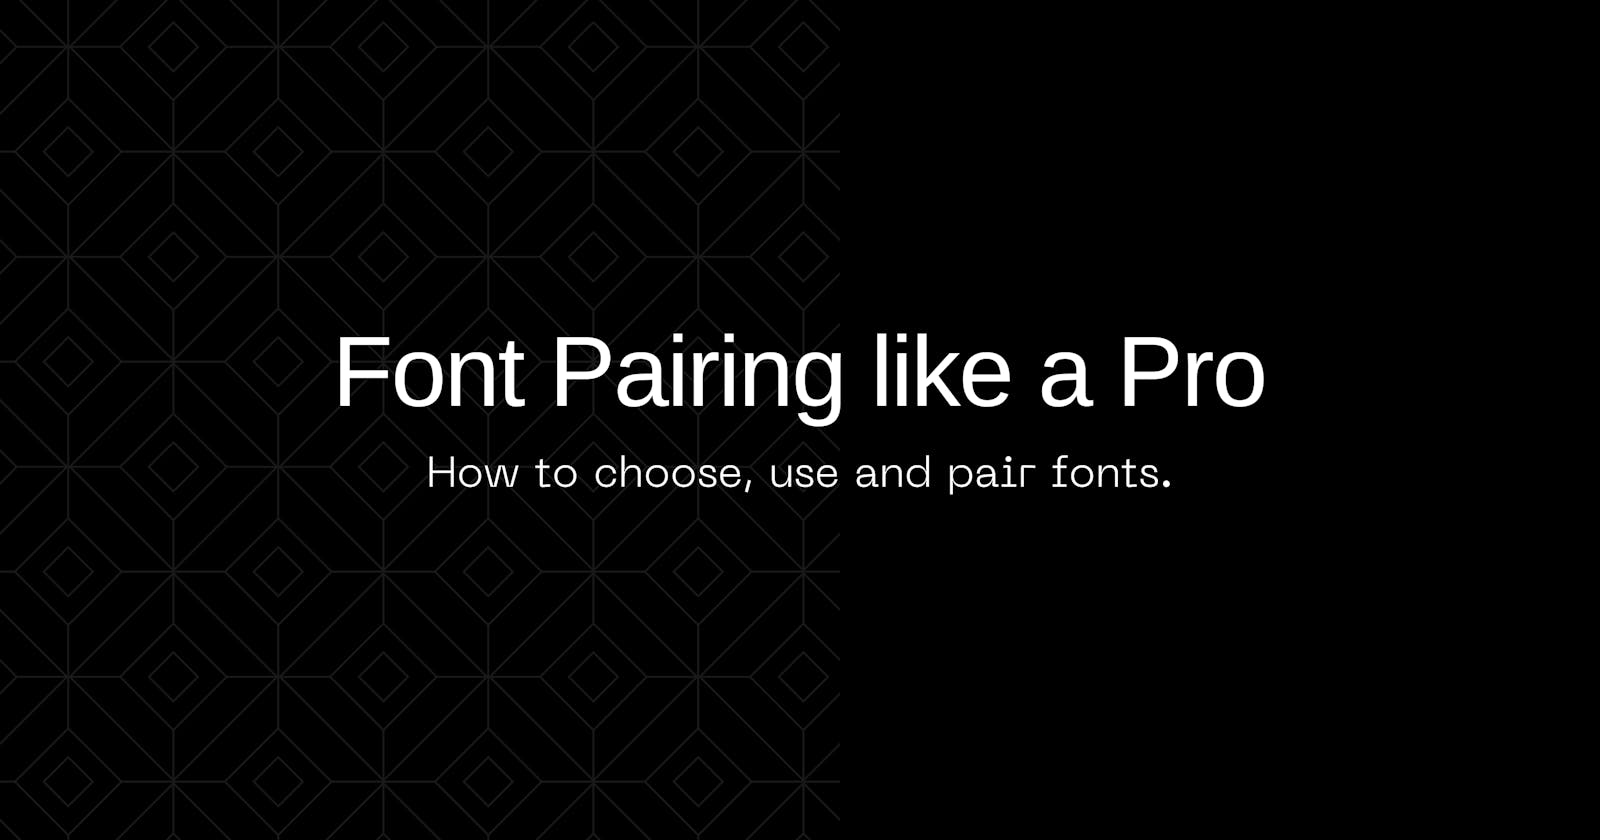 Choosing, Using and Pairing Fonts like a Pro